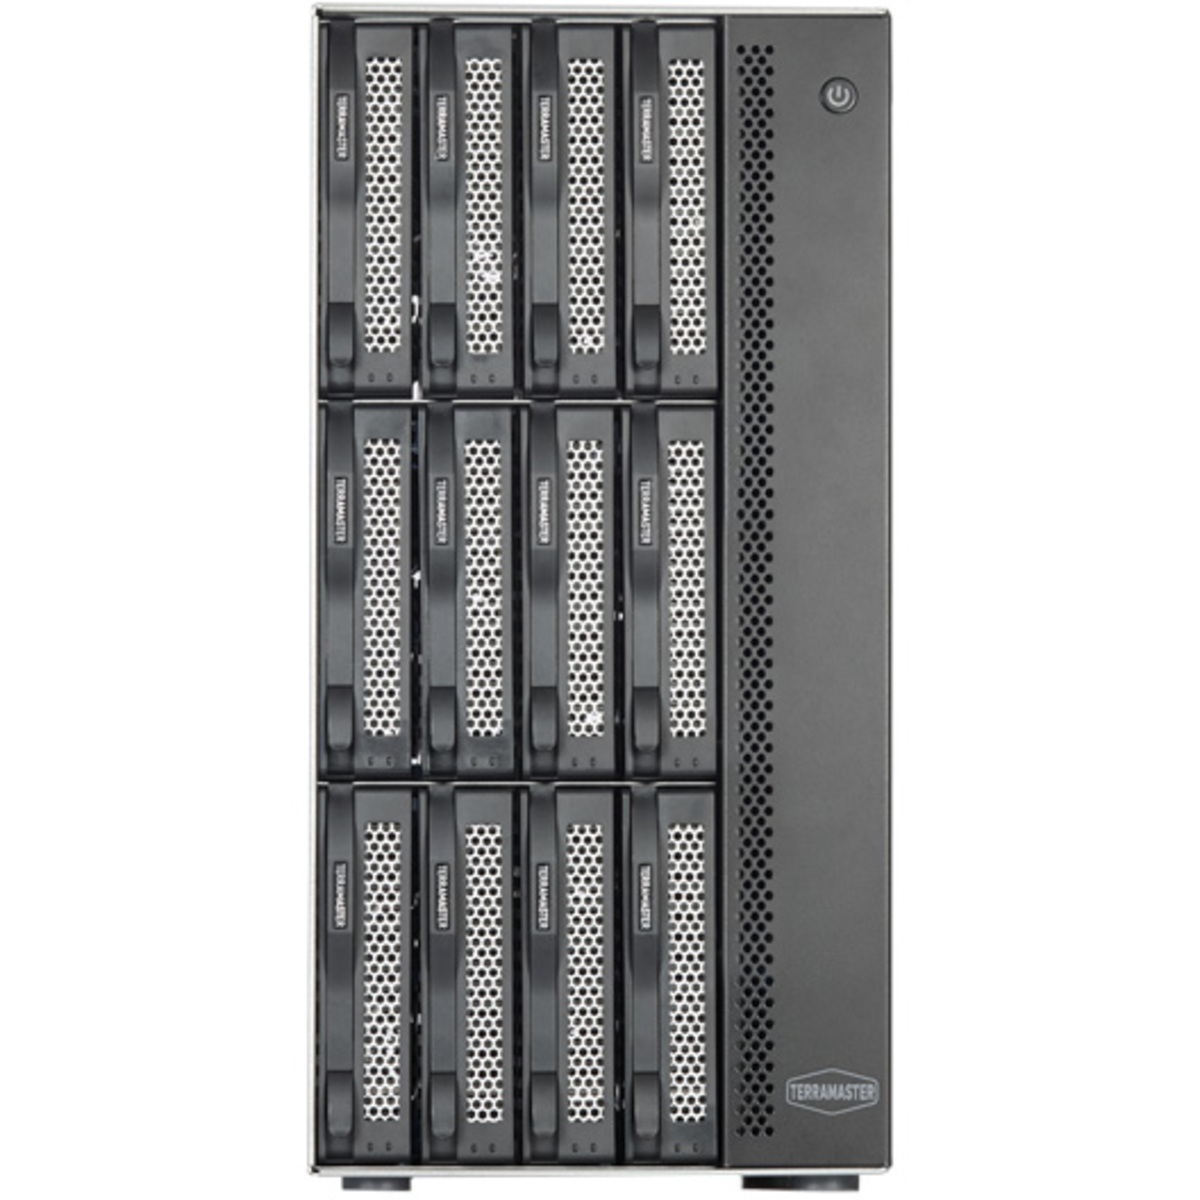 TerraMaster T12-450 66tb 12-Bay Desktop Multimedia / Power User / Business NAS - Network Attached Storage Device 11x6tb Seagate EXOS 7E10 ST6000NM019B 3.5 7200rpm SATA 6Gb/s HDD ENTERPRISE Class Drives Installed - Burn-In Tested T12-450